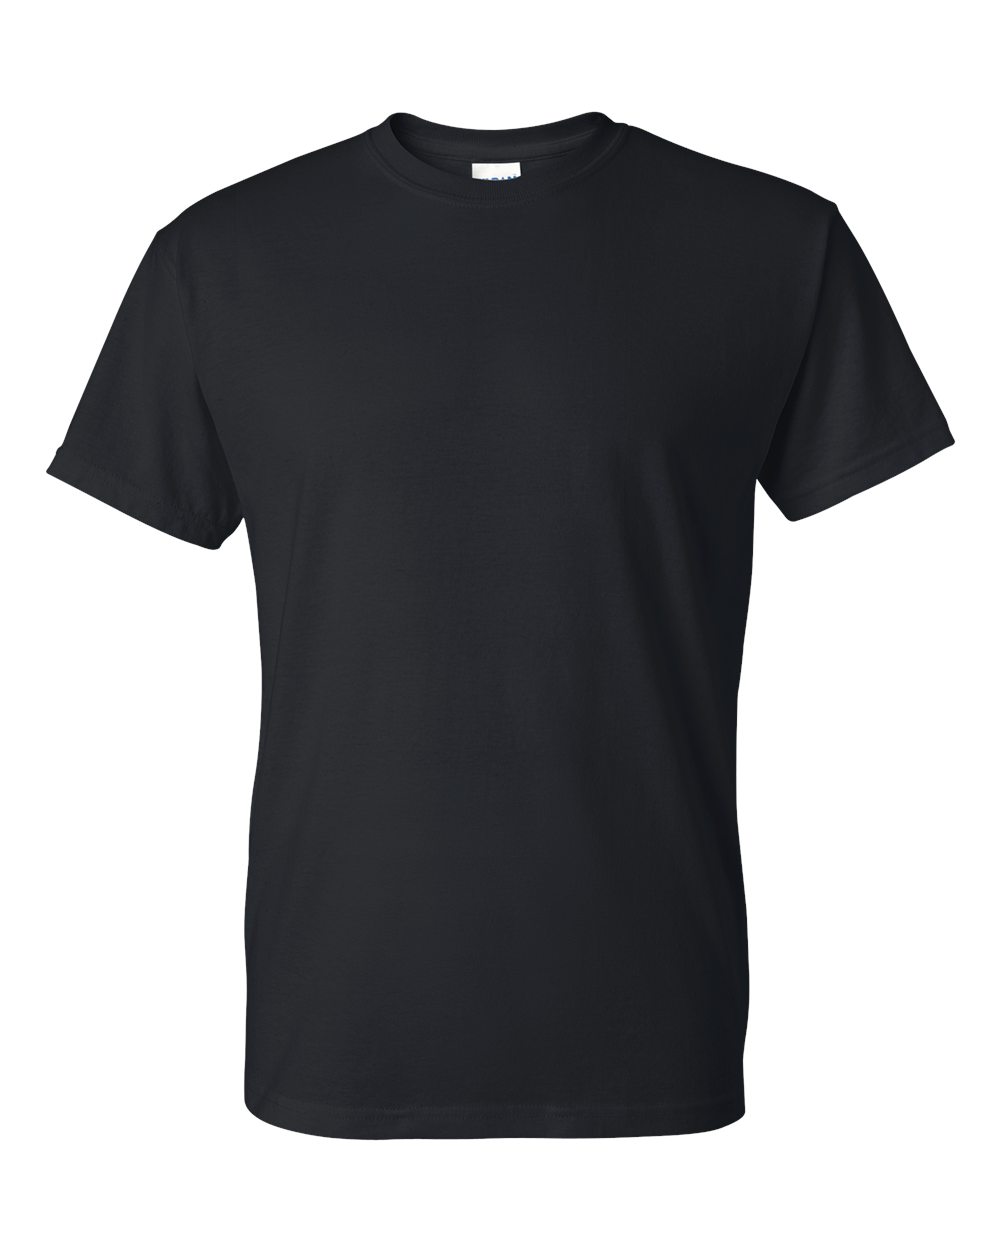 custom apparel gildan dry blend jersey tee shirt in multiple sizes and colors